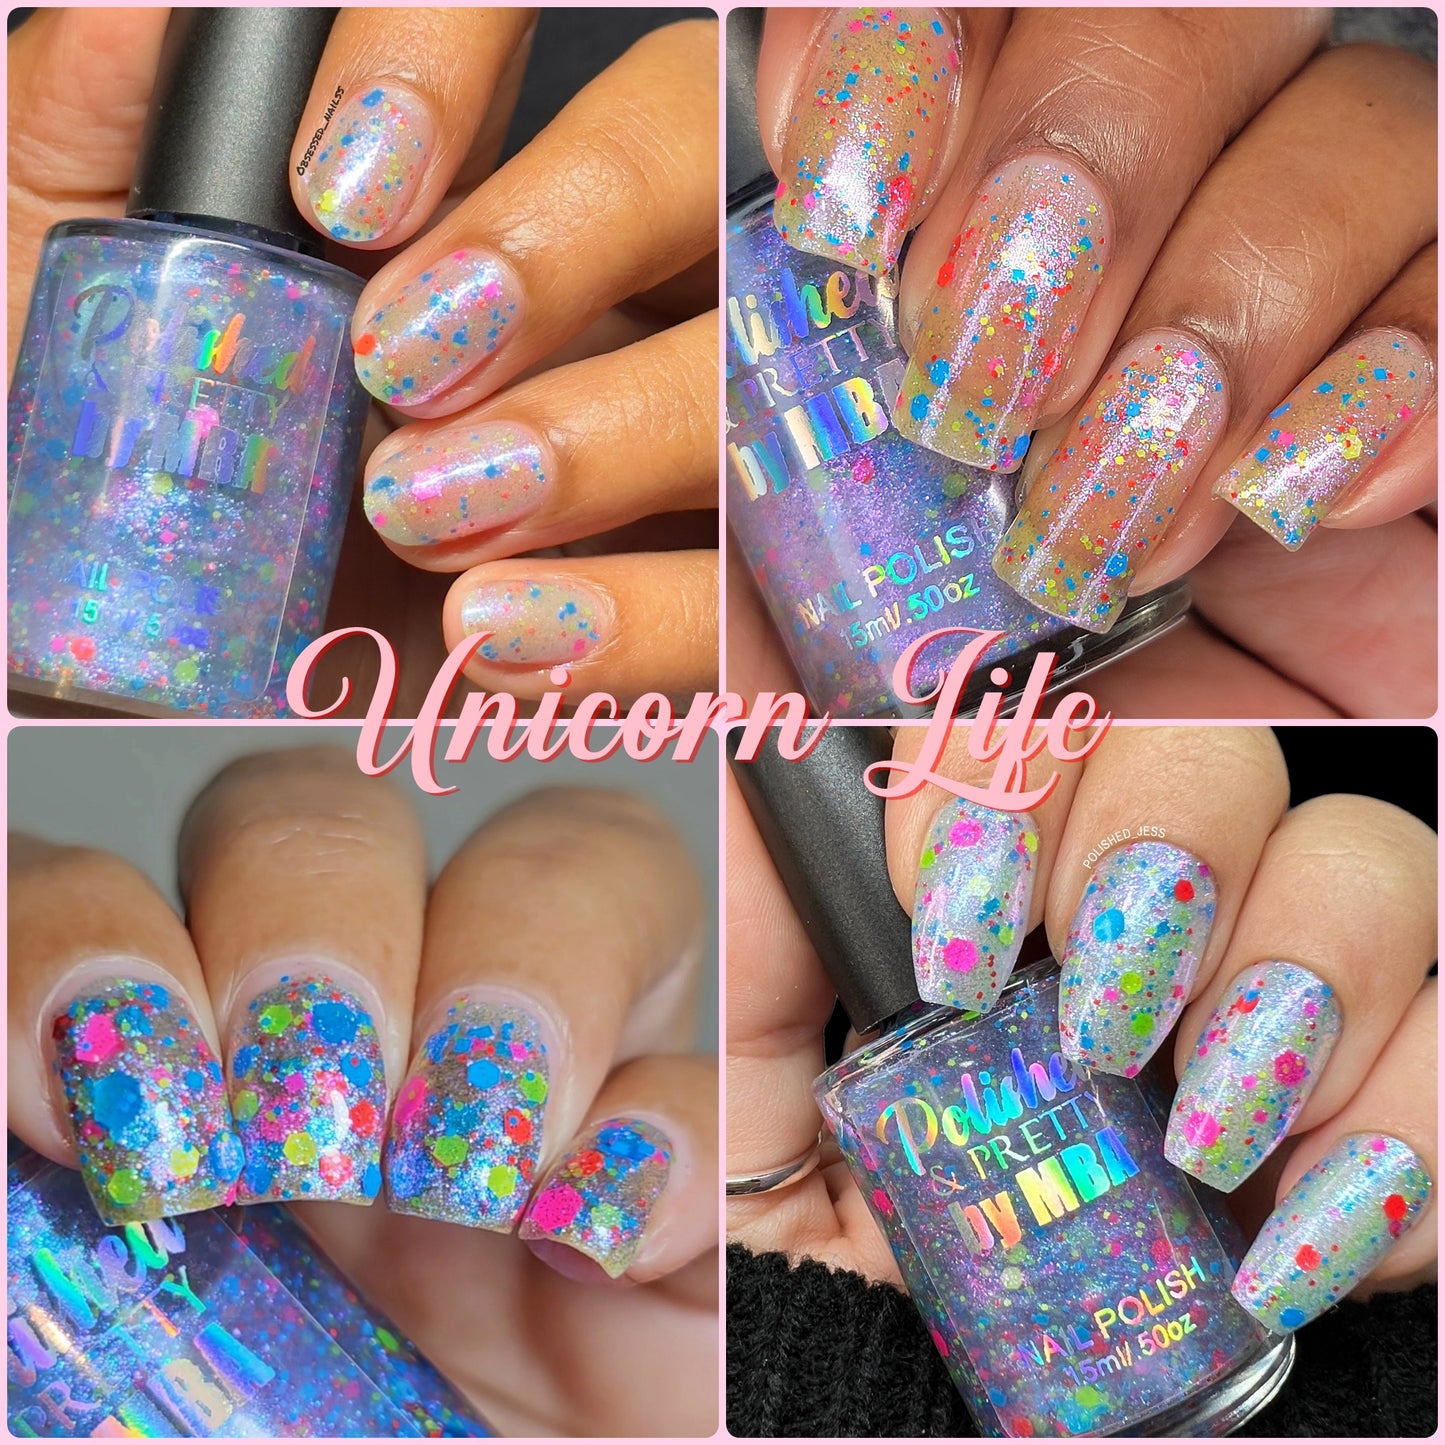 Happy As A Unicorn-Iridescent Multichrome Collection-Large 15ml Bottles